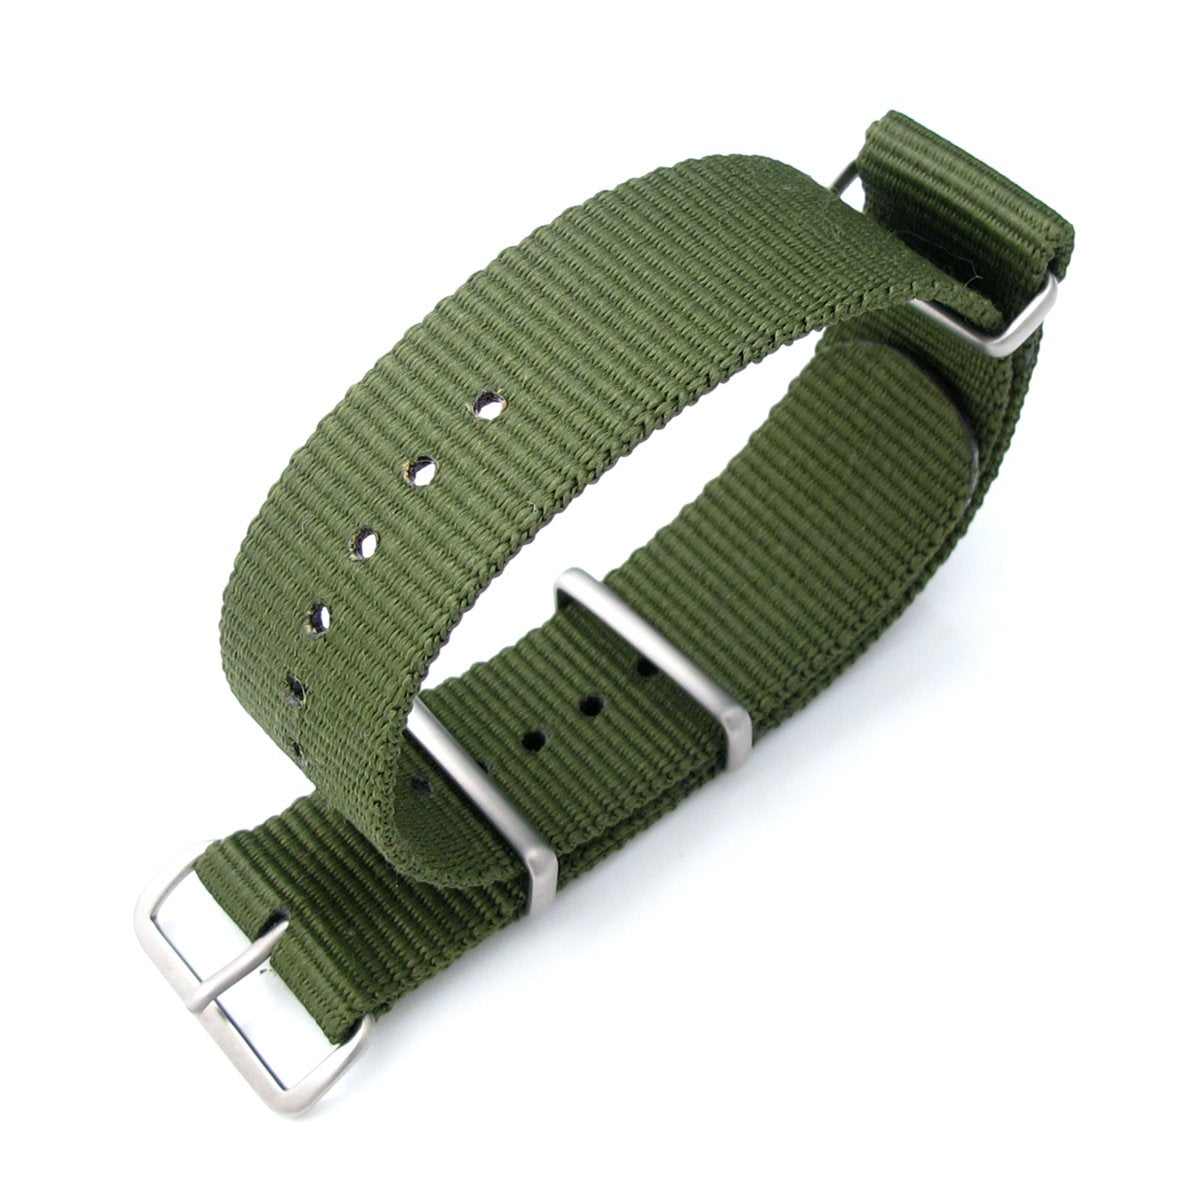 MiLTAT 21mm G10 NATO Military Watch Strap Ballistic Nylon Armband Brushed Forest Green Strapcode Watch Bands